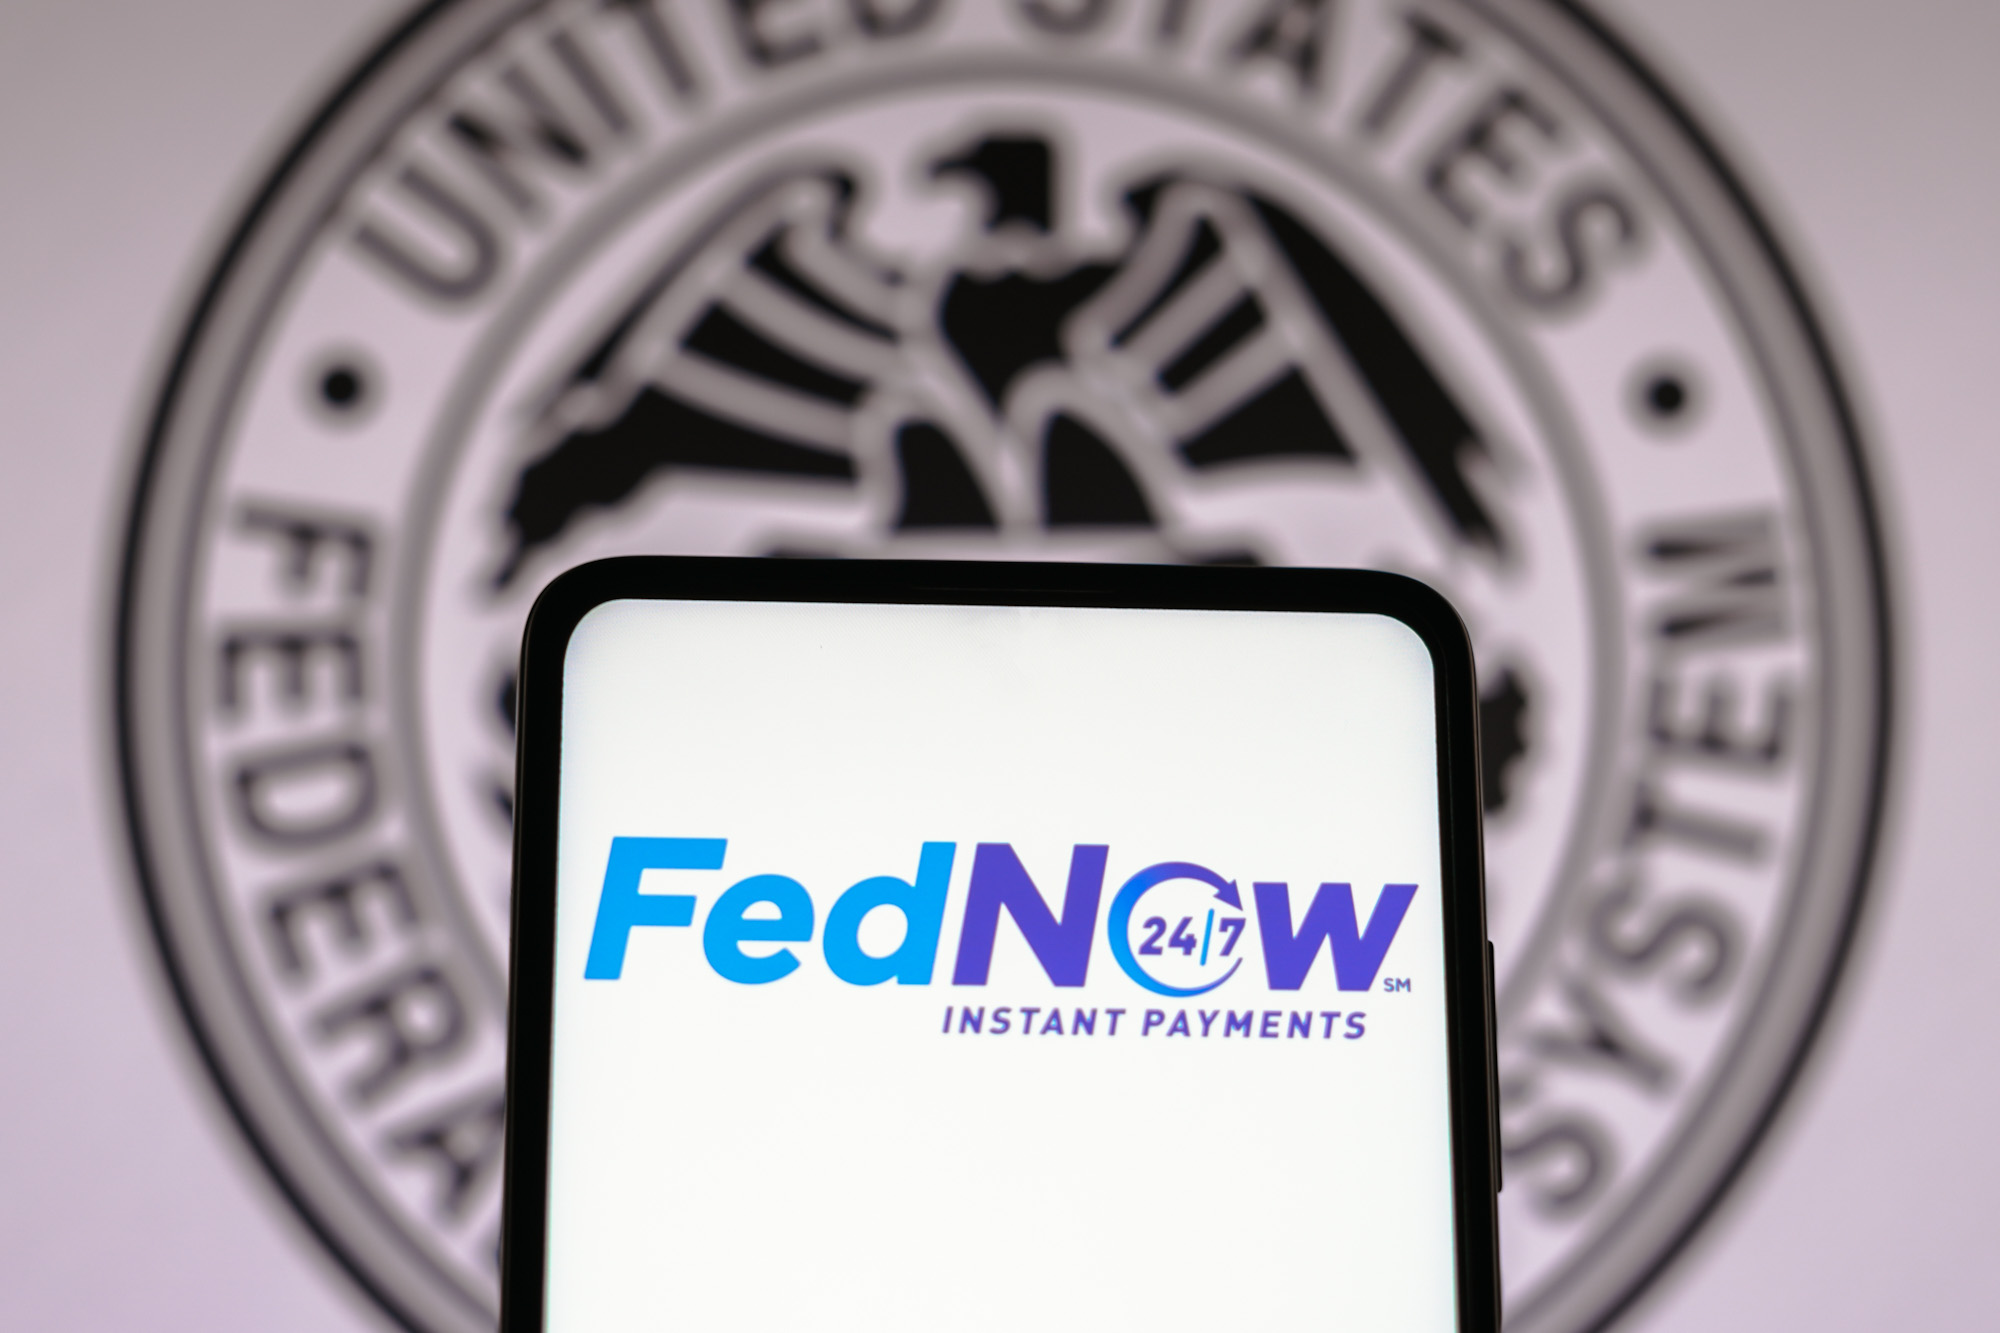 A phone displays the words “FedNow 24/7 Instant Payments” in front of a circle inscribed with an eagle and the words “United States Federal System”